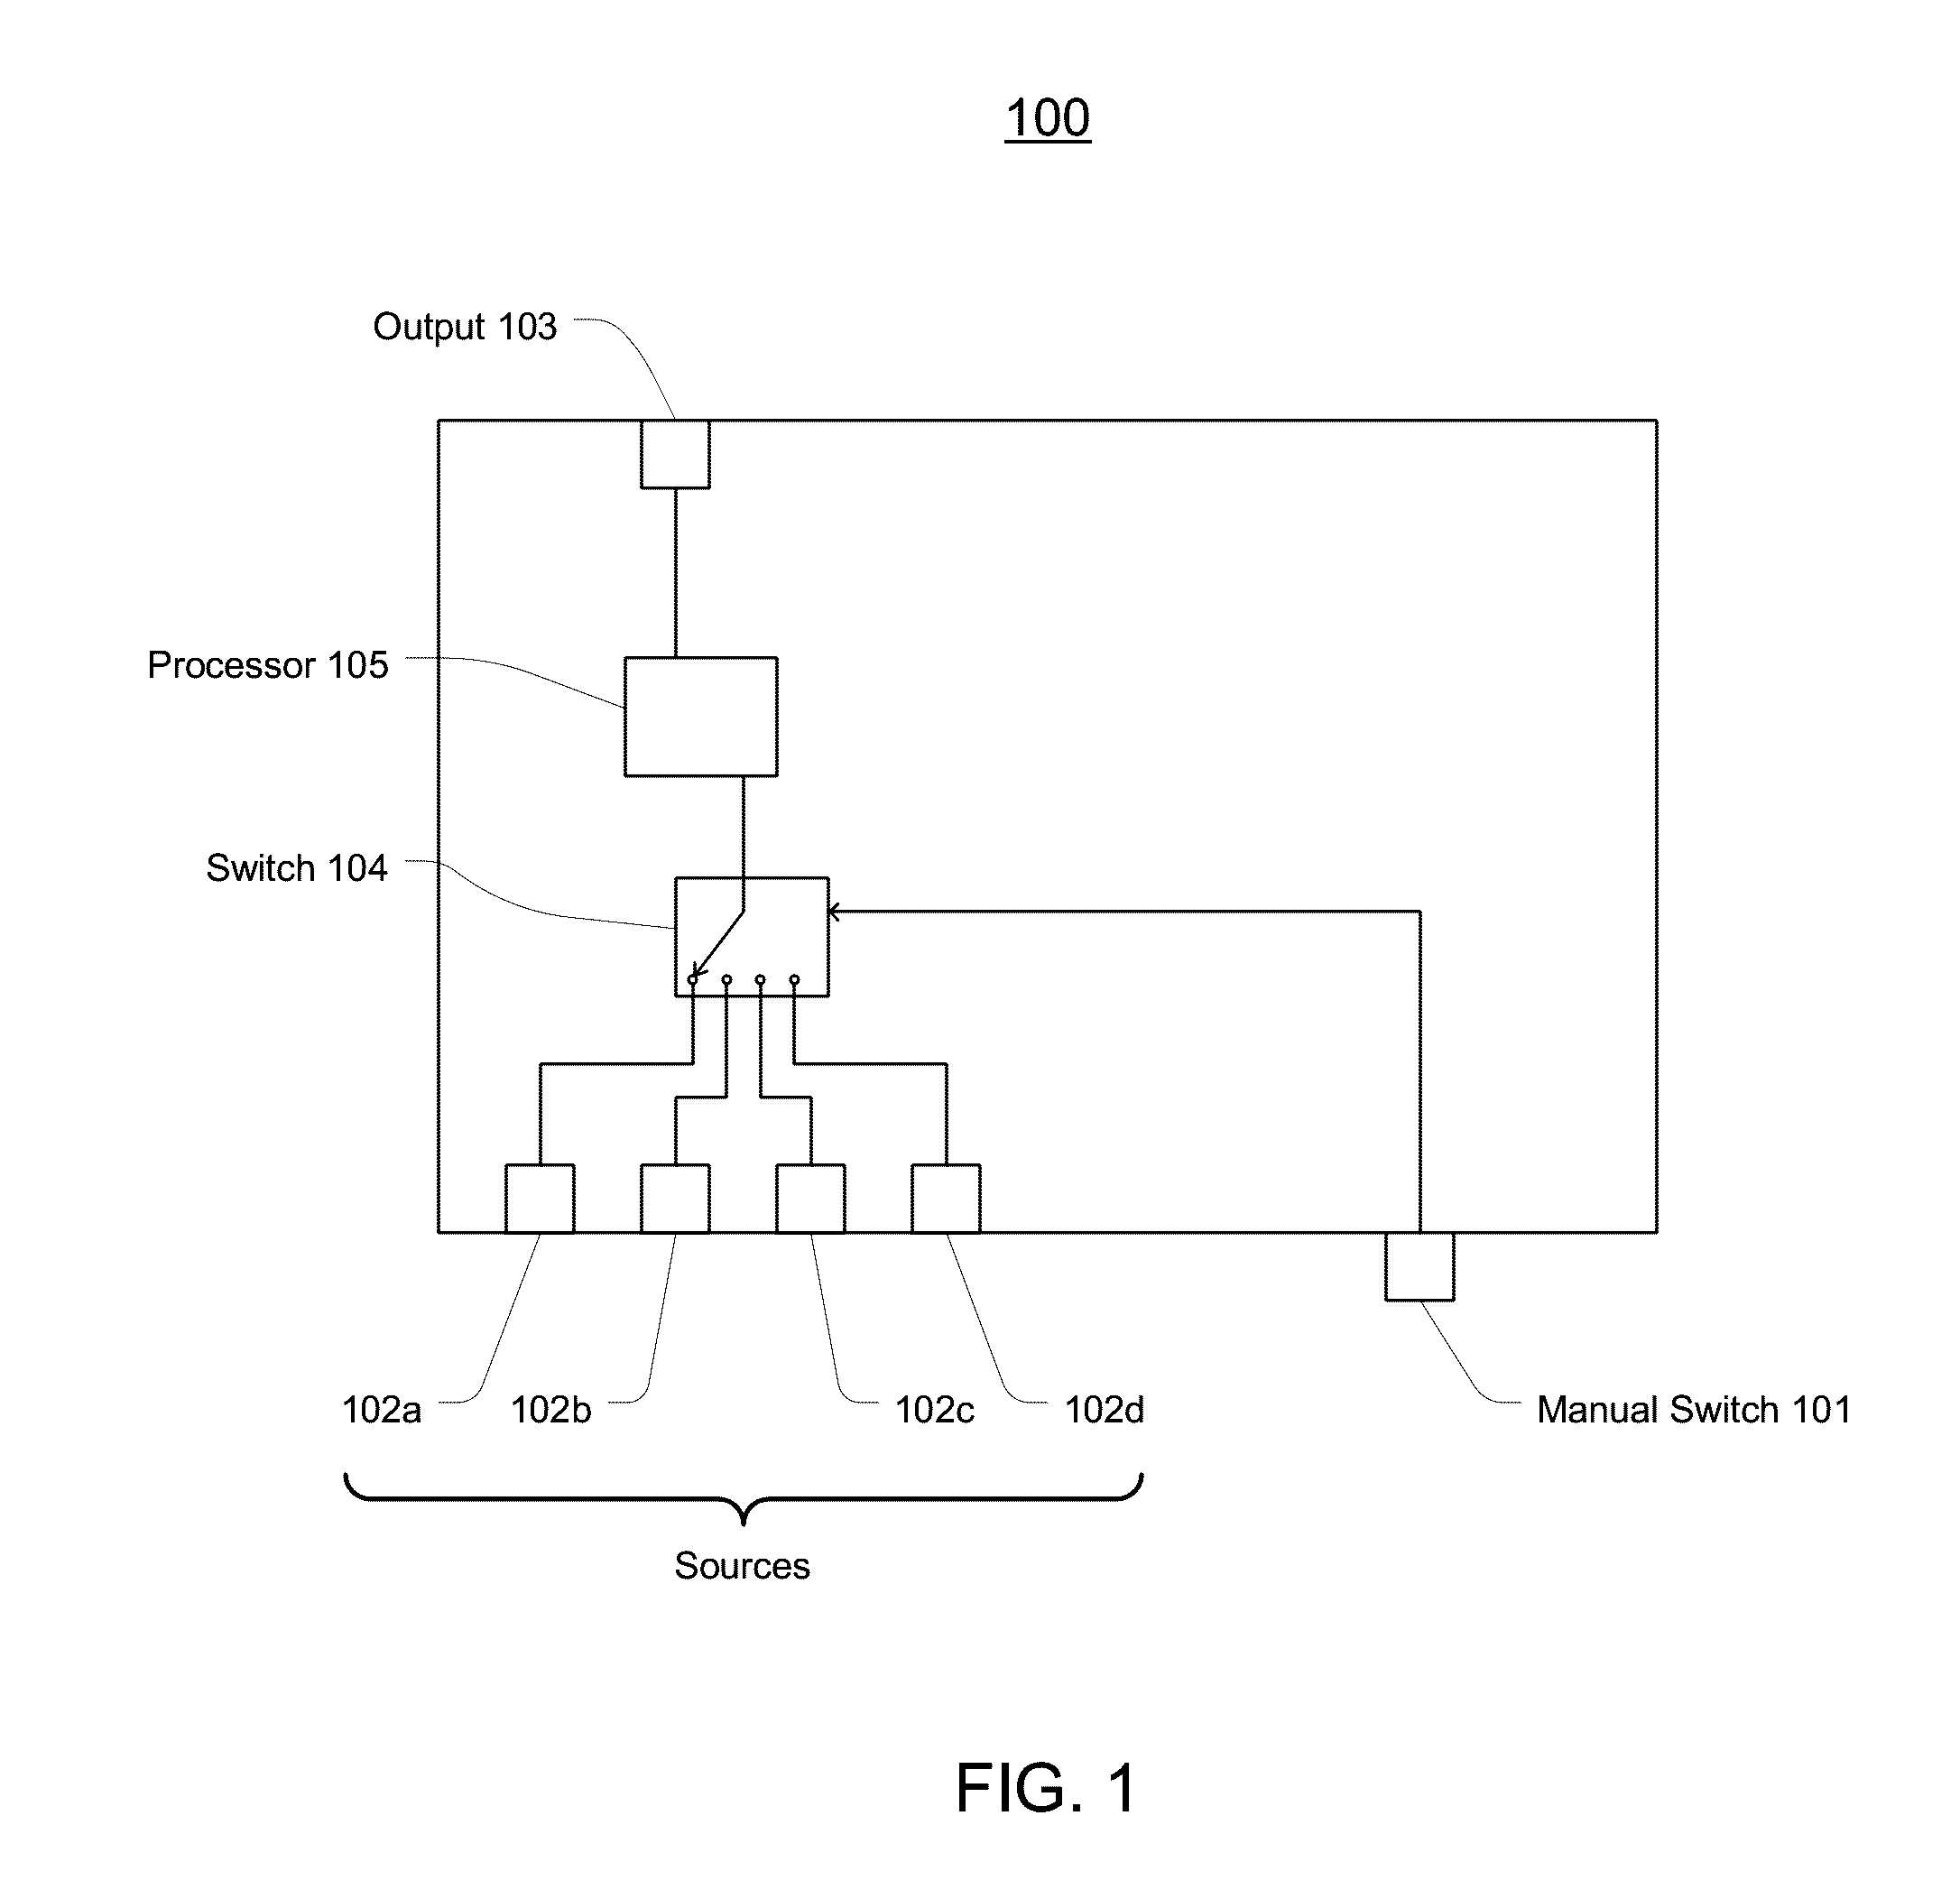 Manual switch system for outputting multimedia content to a digital sign